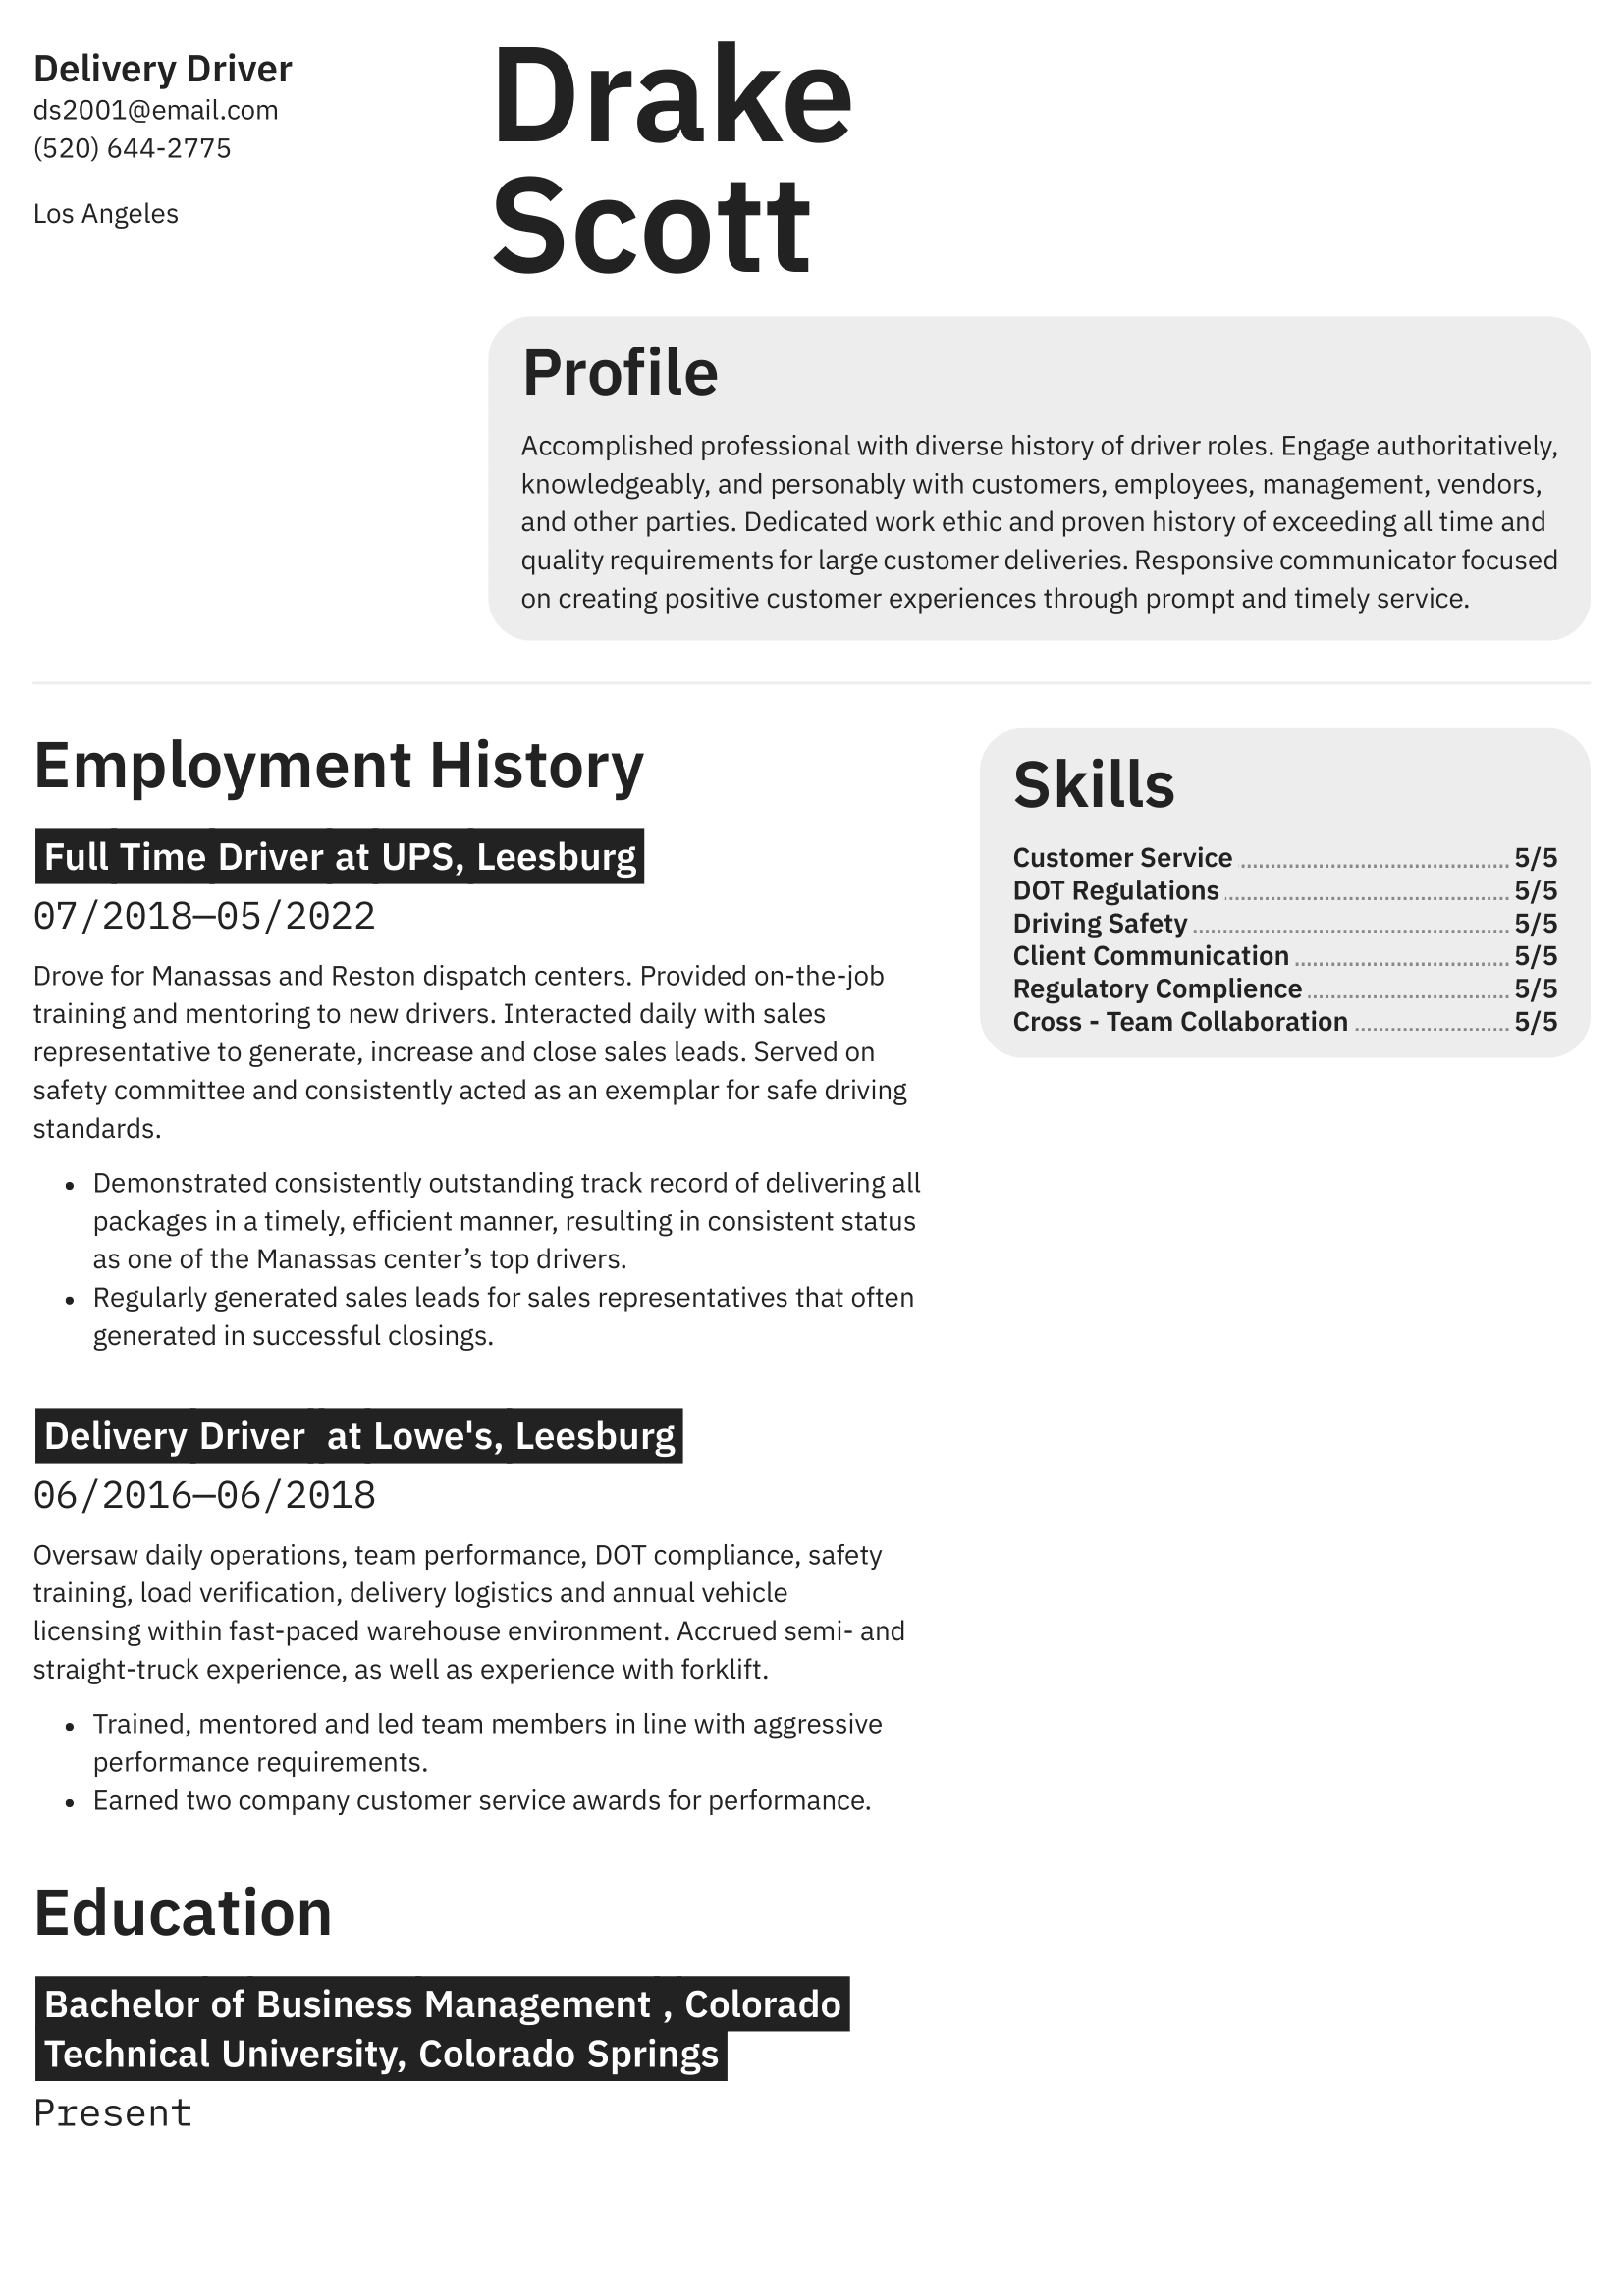 Delivery Driver Resume Example